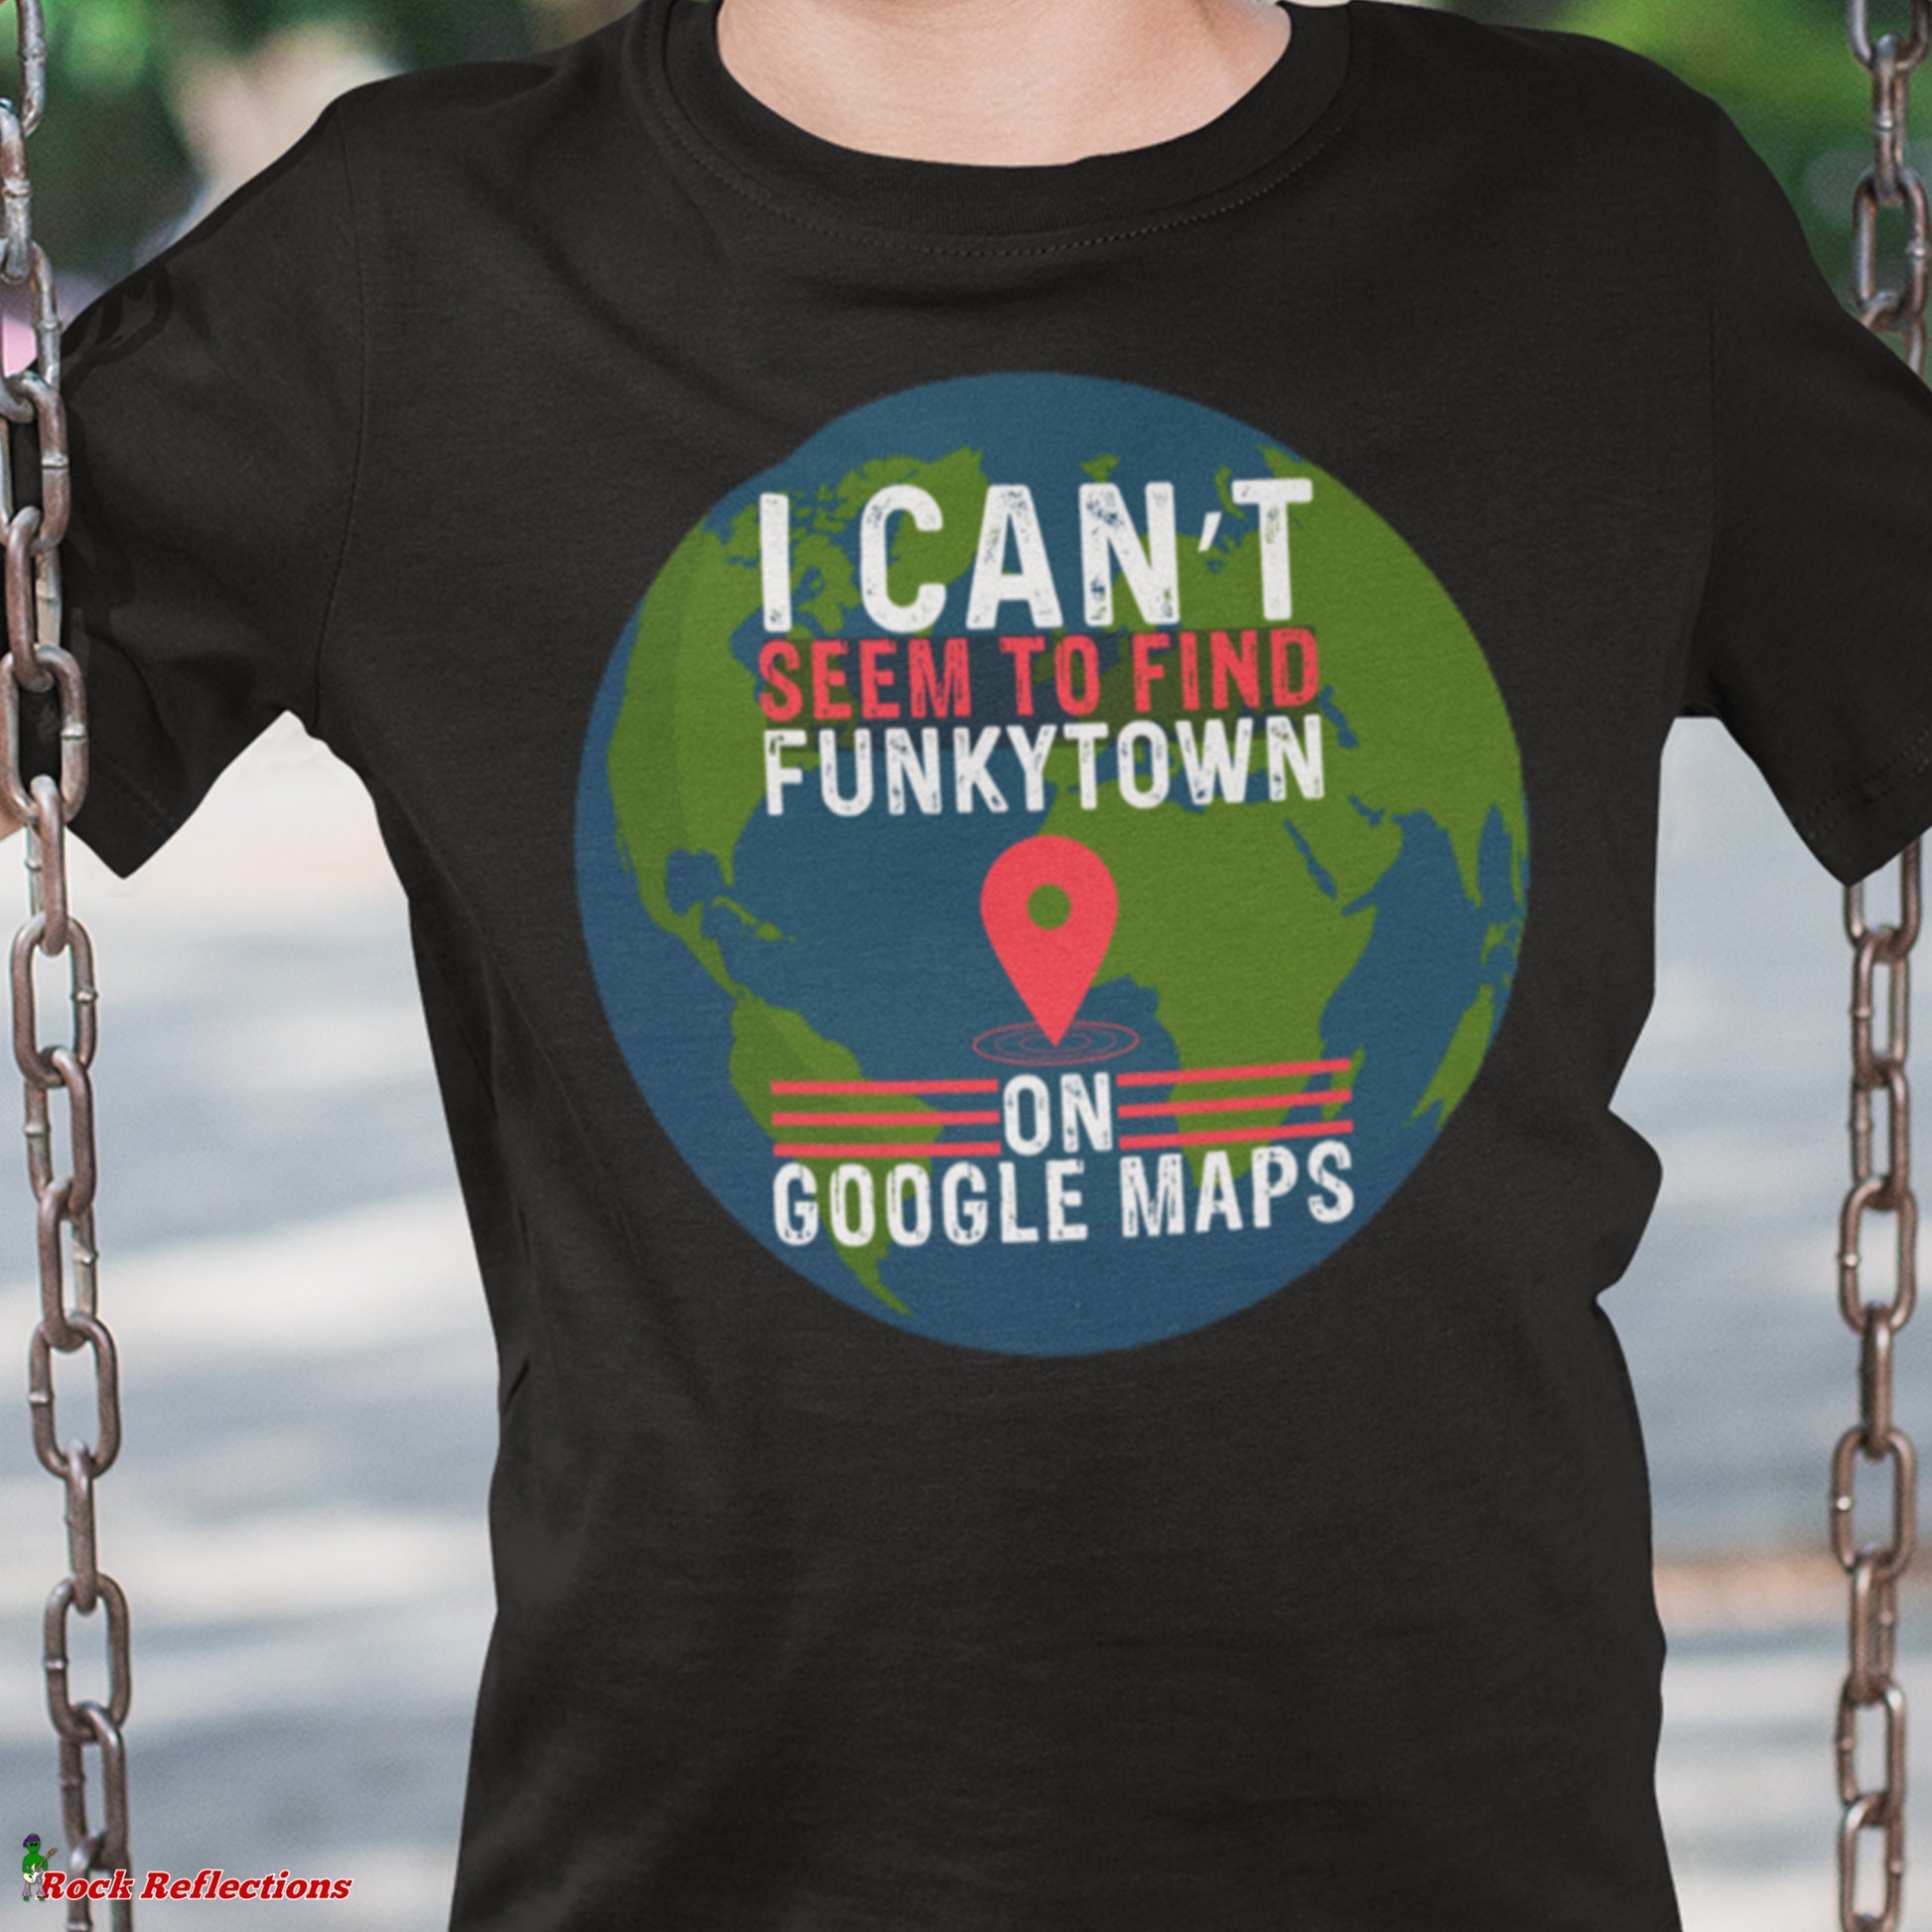 Can't Find Funkytown T-Shirt SPOD